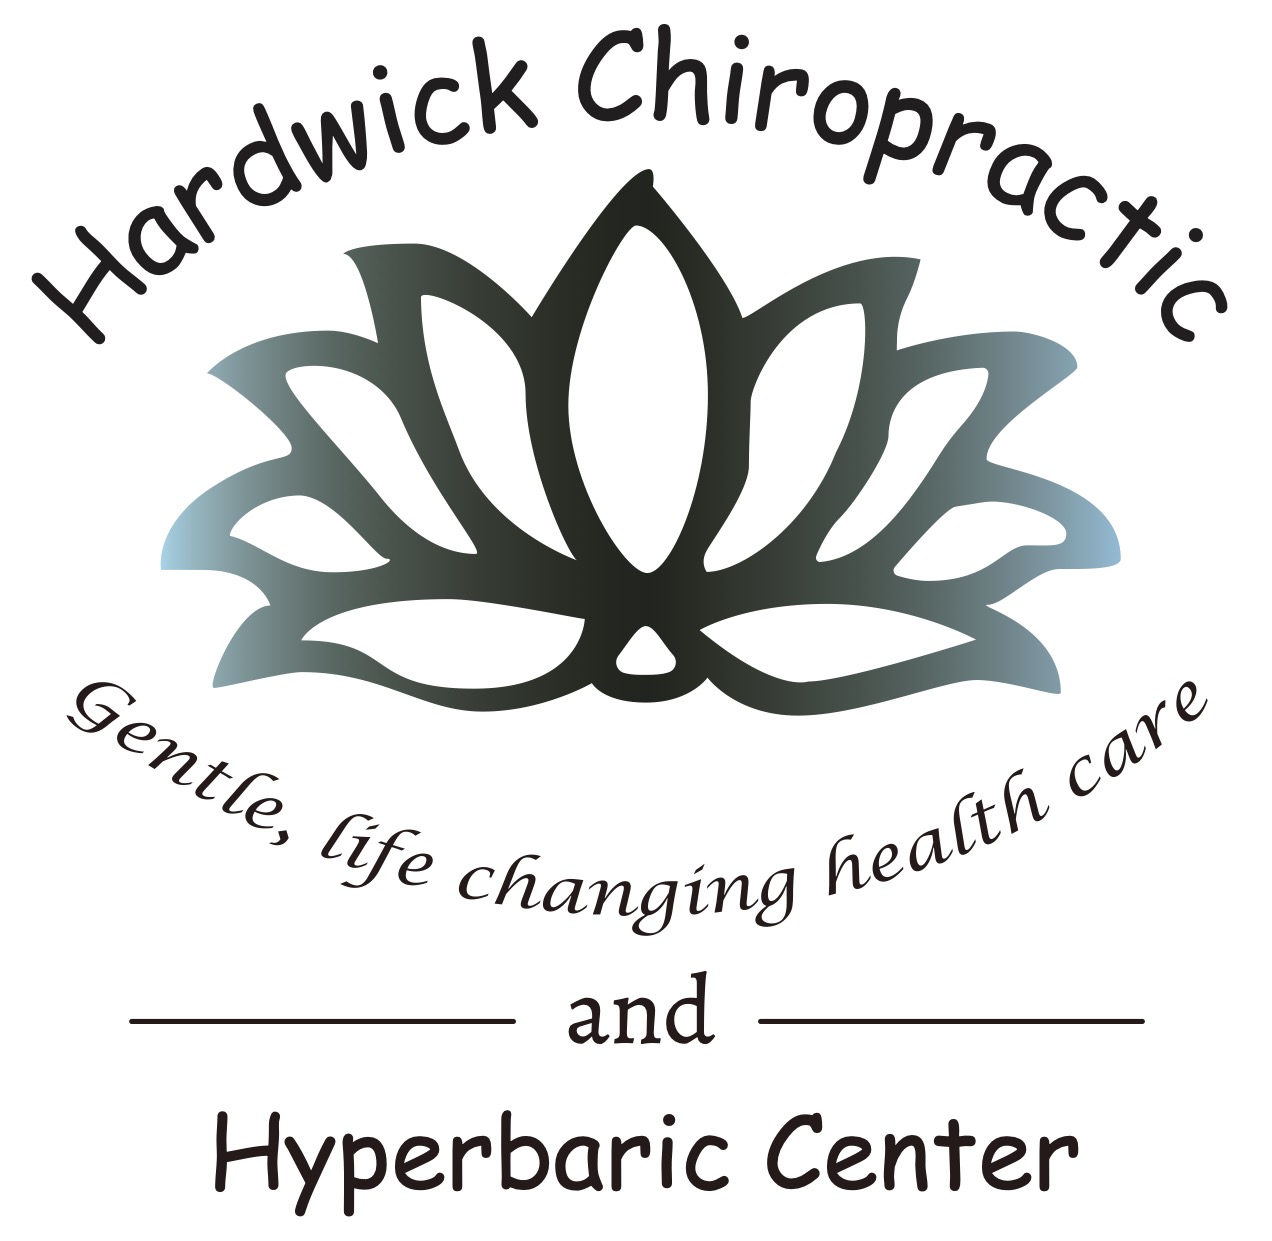 Hardwick Chiropractic and Hyperbaric Oxygen Therapy